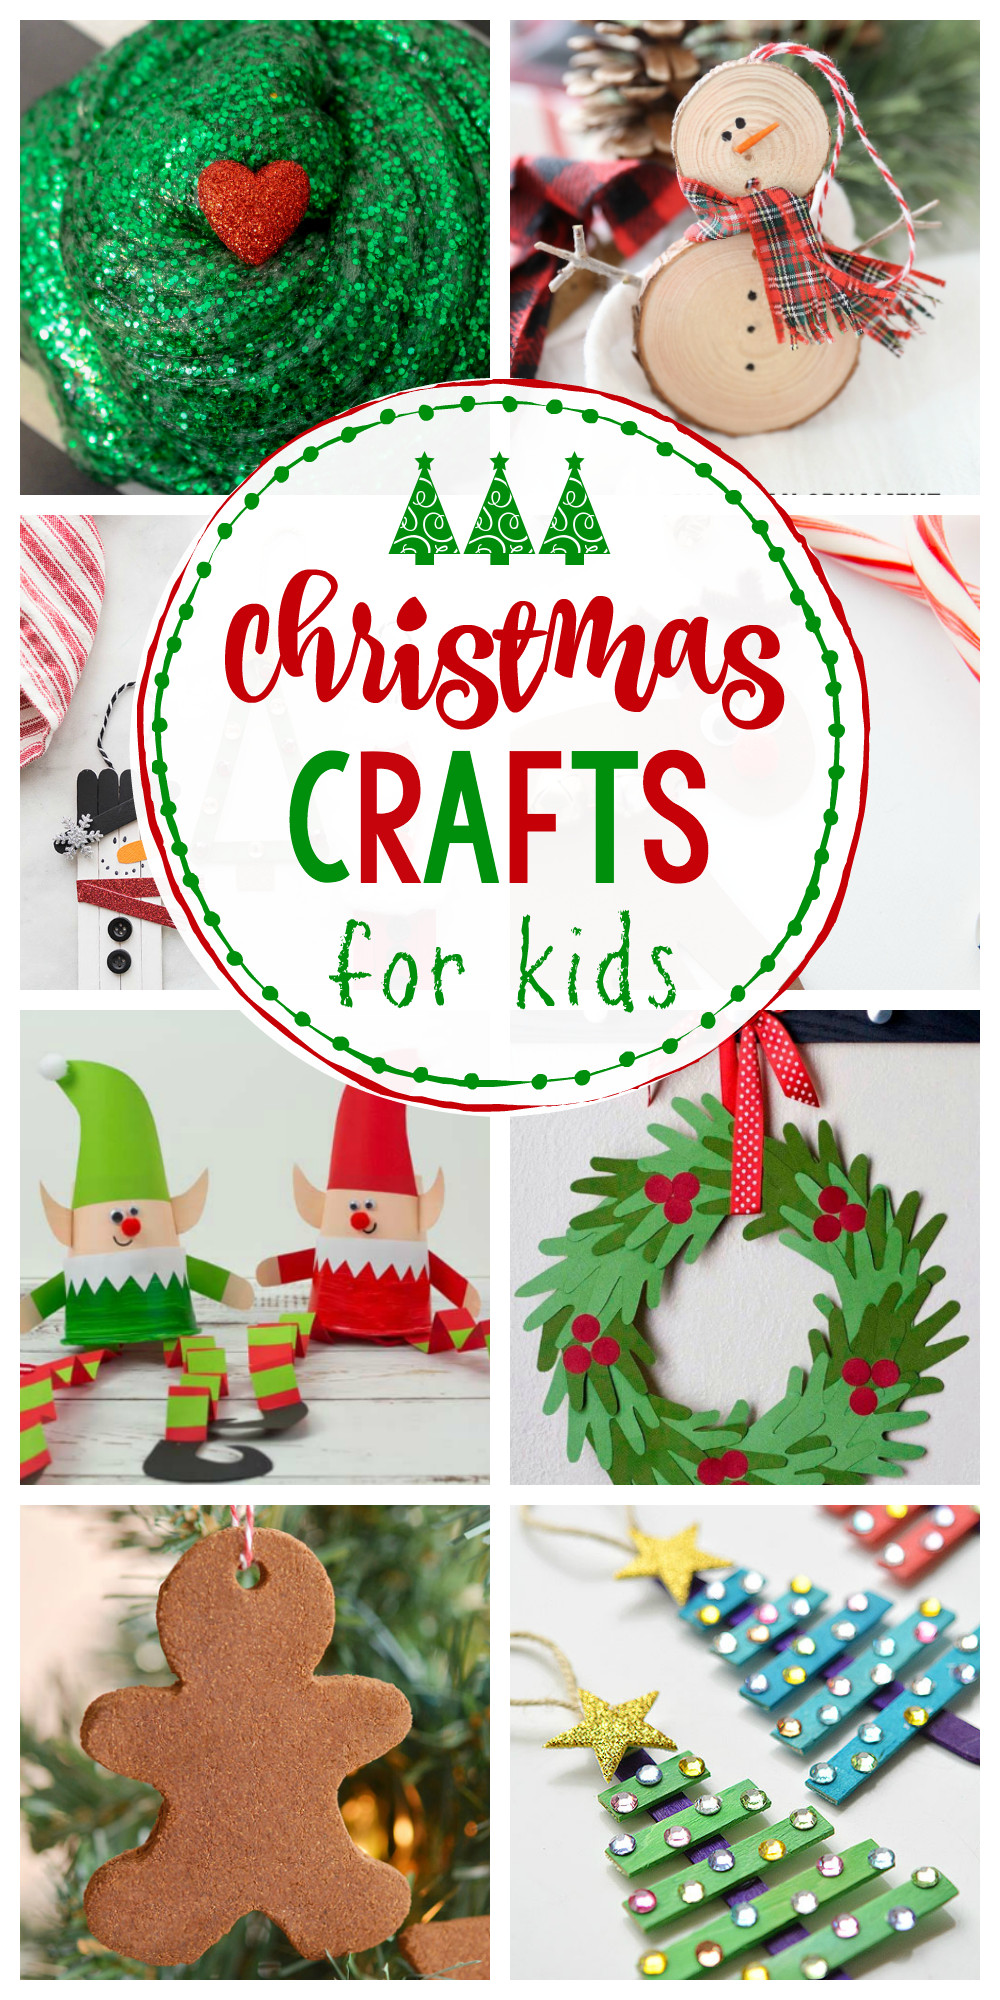 Kids Christmas Crafts Easy
 25 Easy Christmas Crafts for Kids Crazy Little Projects